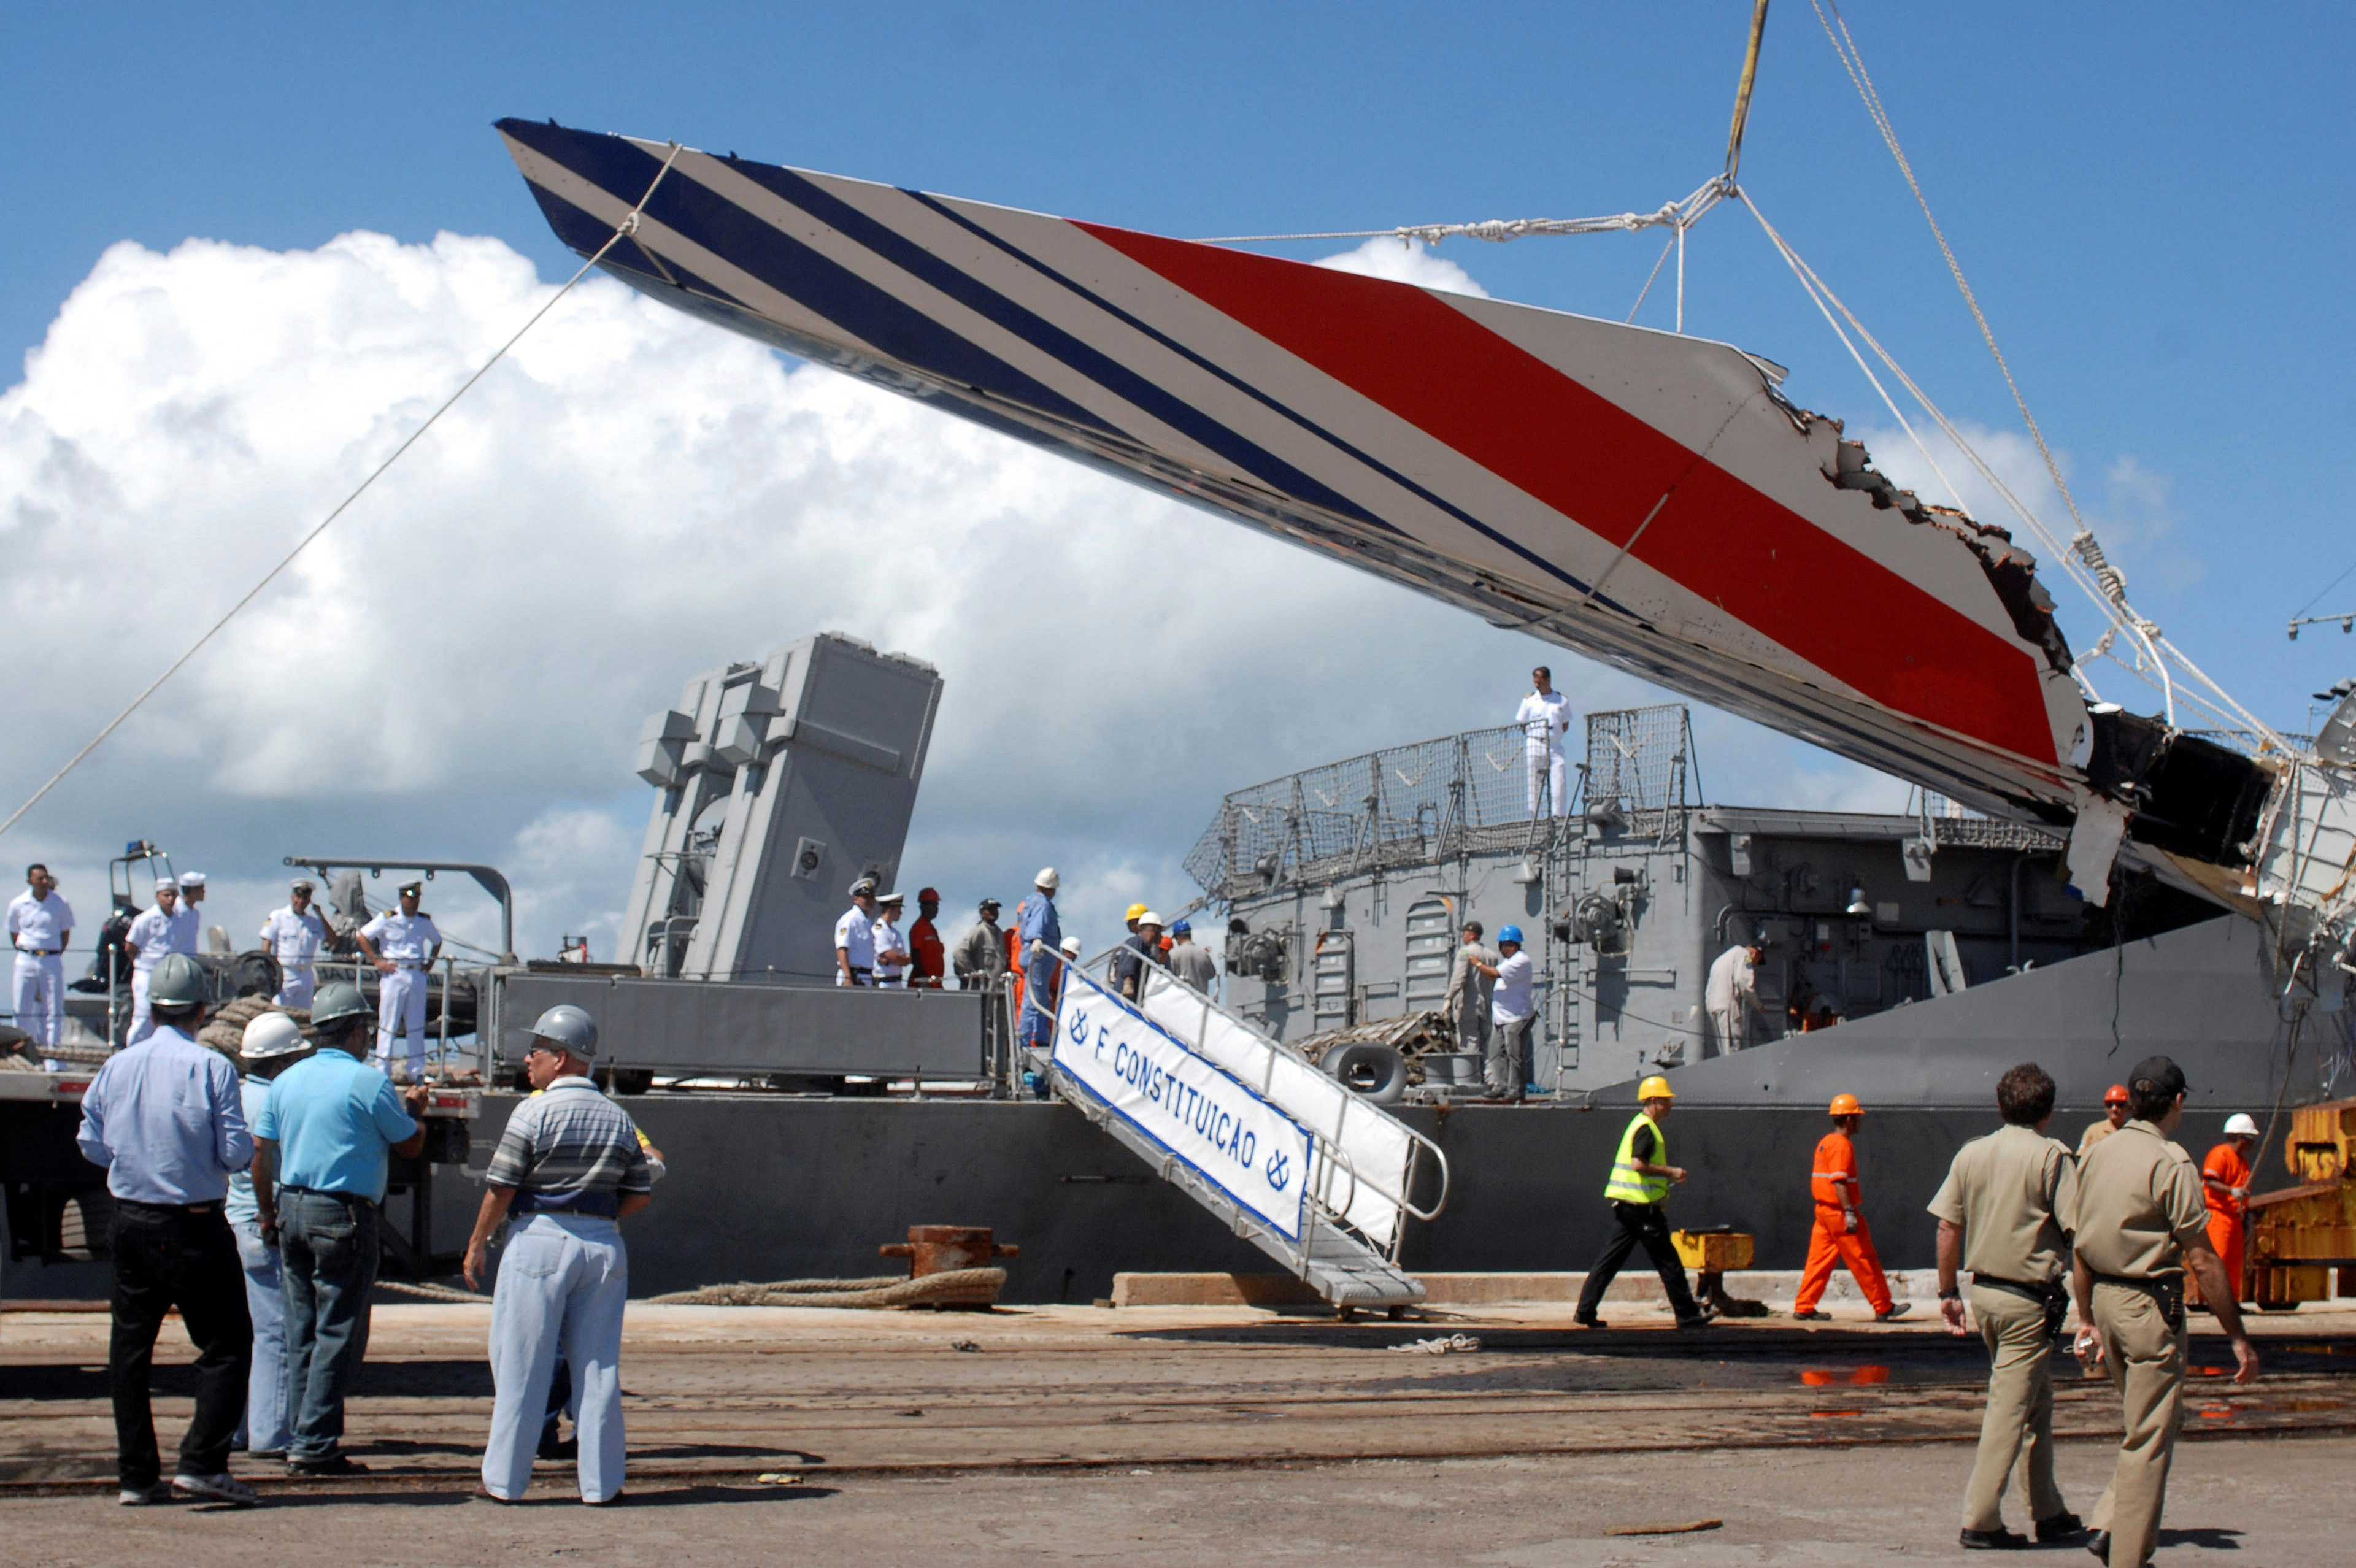 Debris of the missing Air France flight 447, recovered from the Atlantic Ocean, arrives at Recife's port